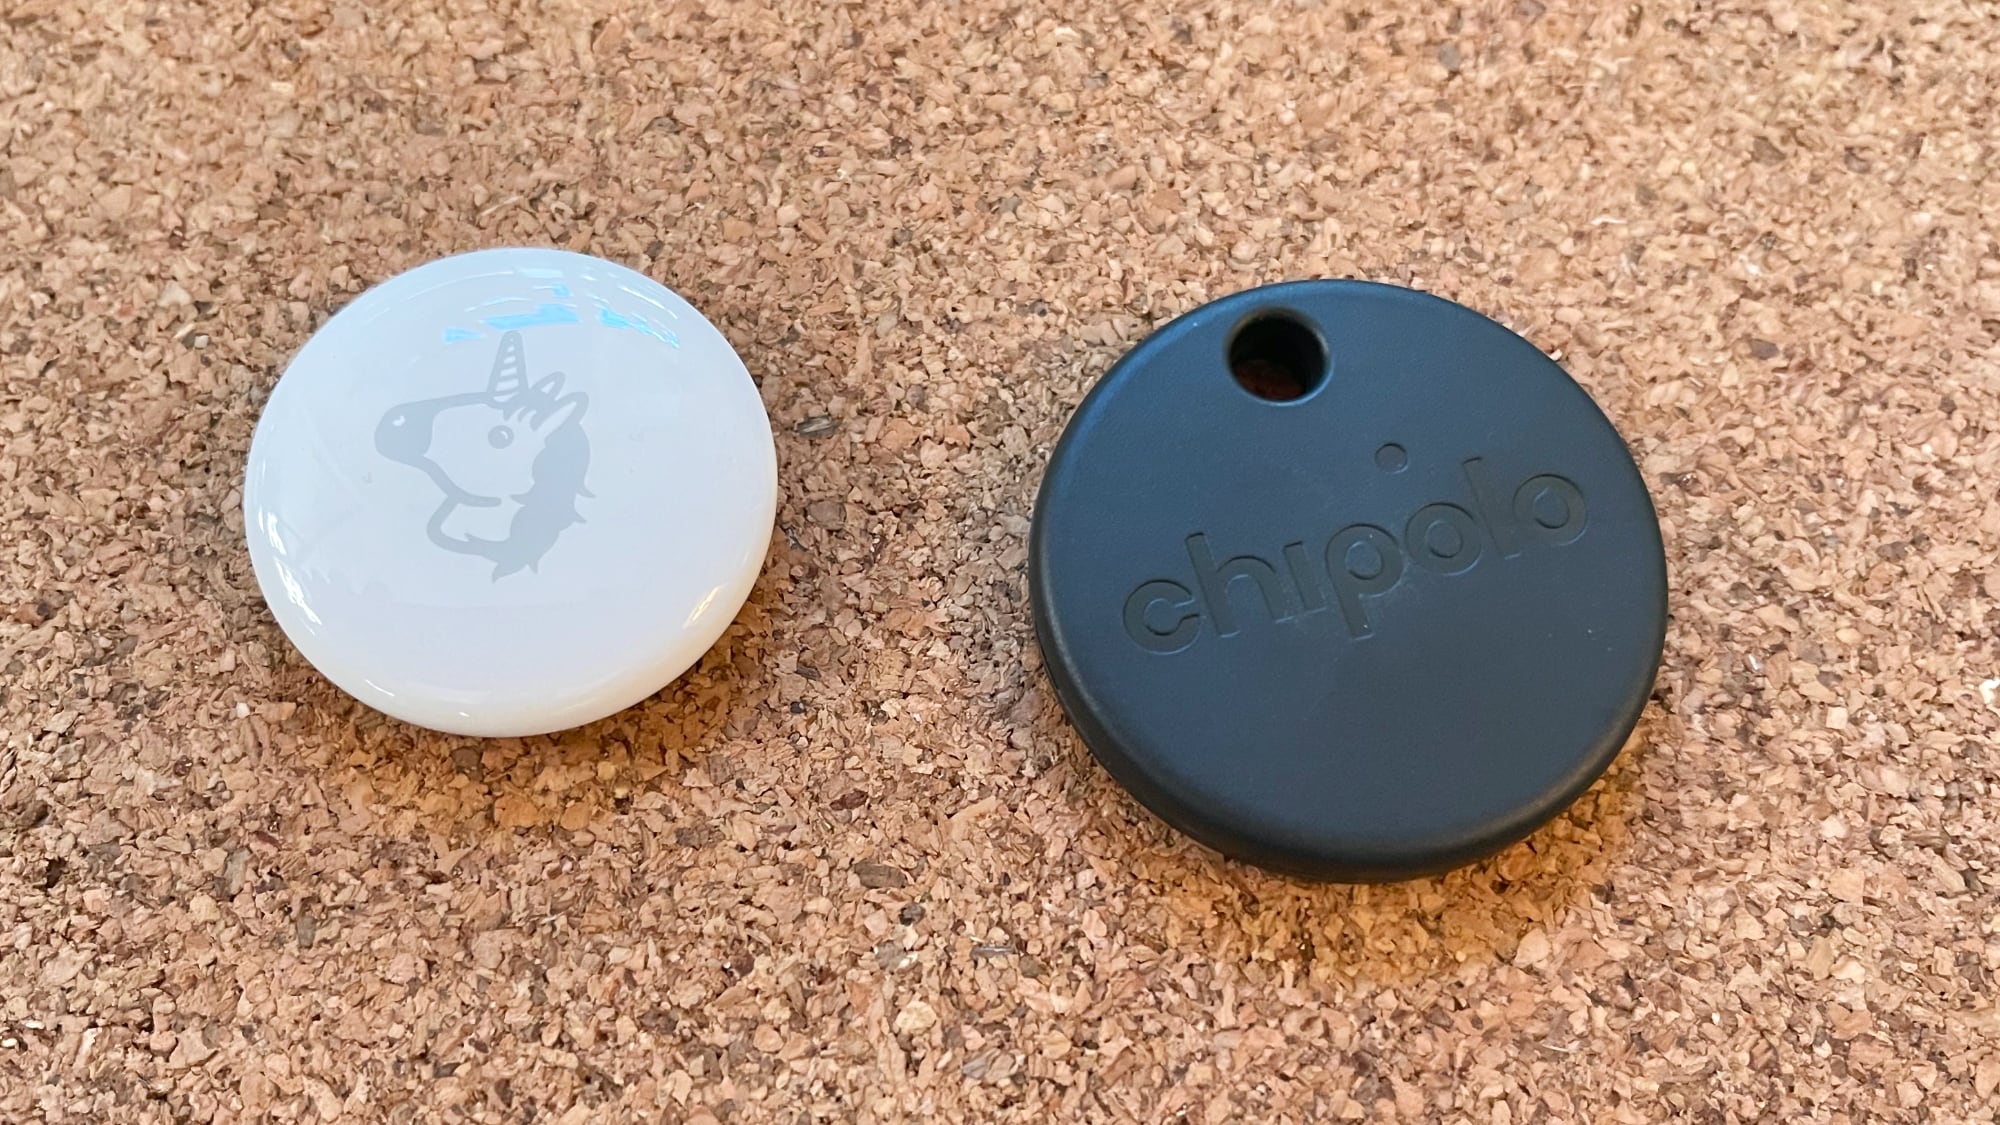 Review: The Chipolo ONE Spot is a Solid AirTag Alternative With